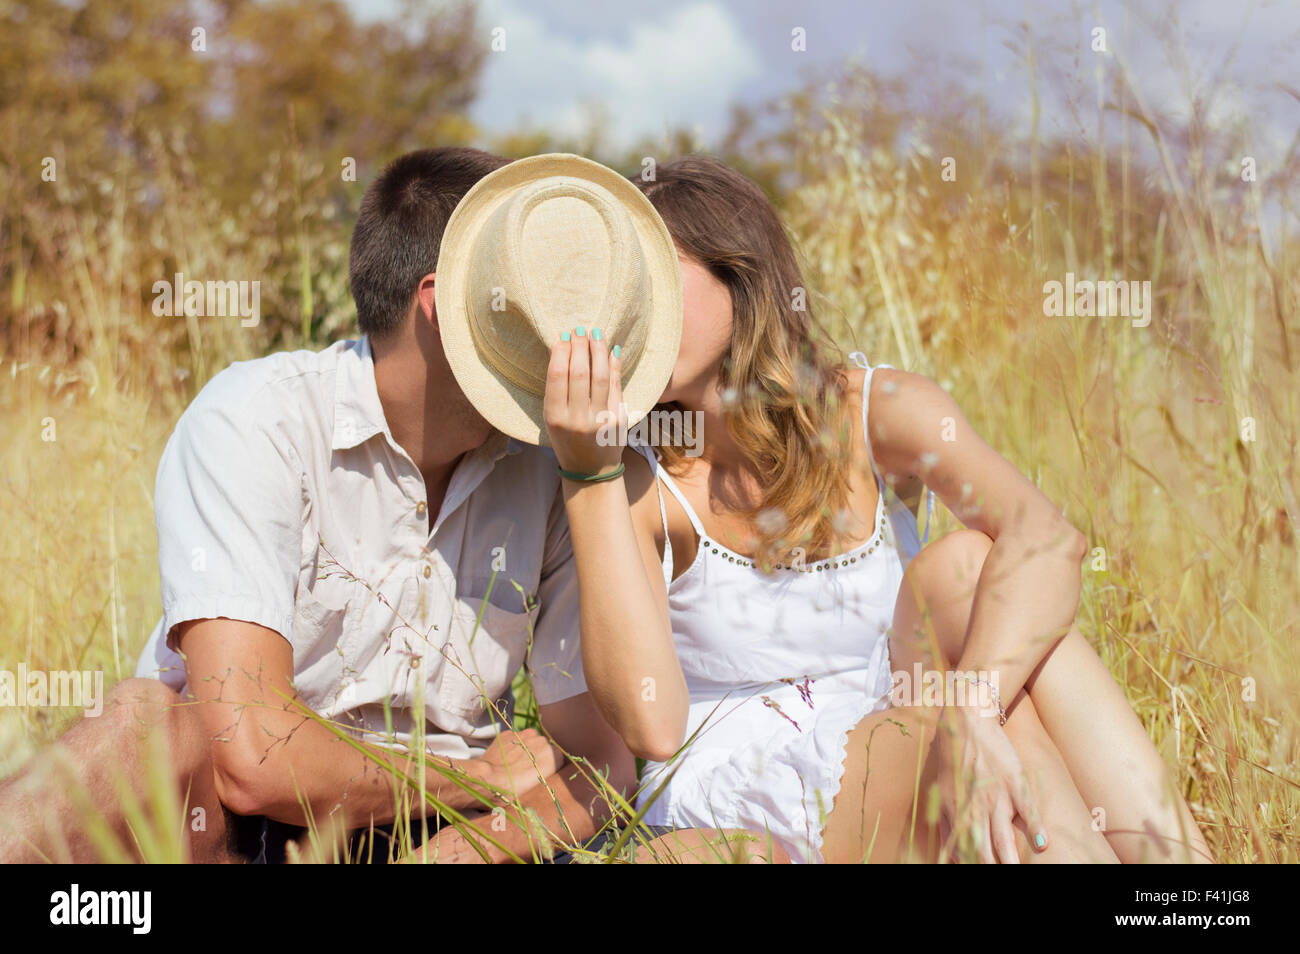 Couple kissing in the field behind a straw hat Stock Photo